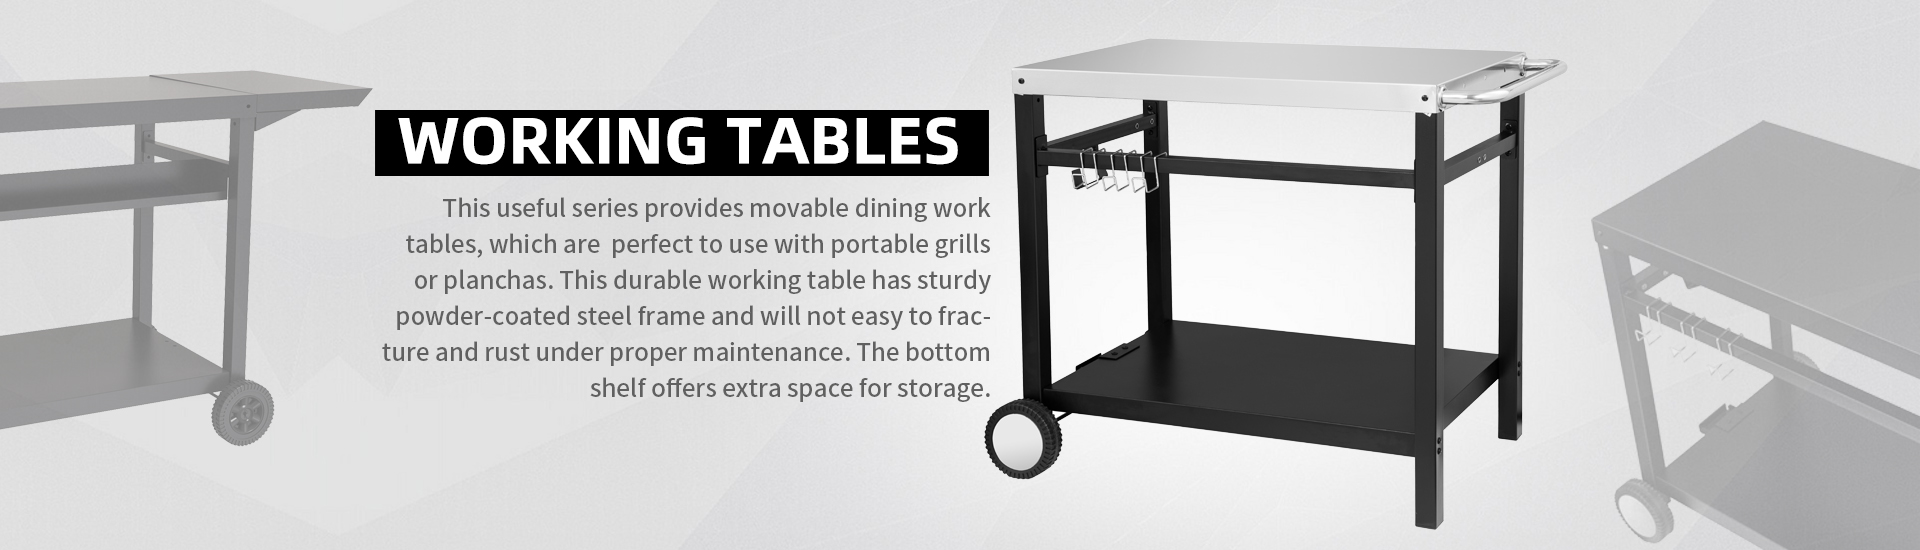 Working Tables